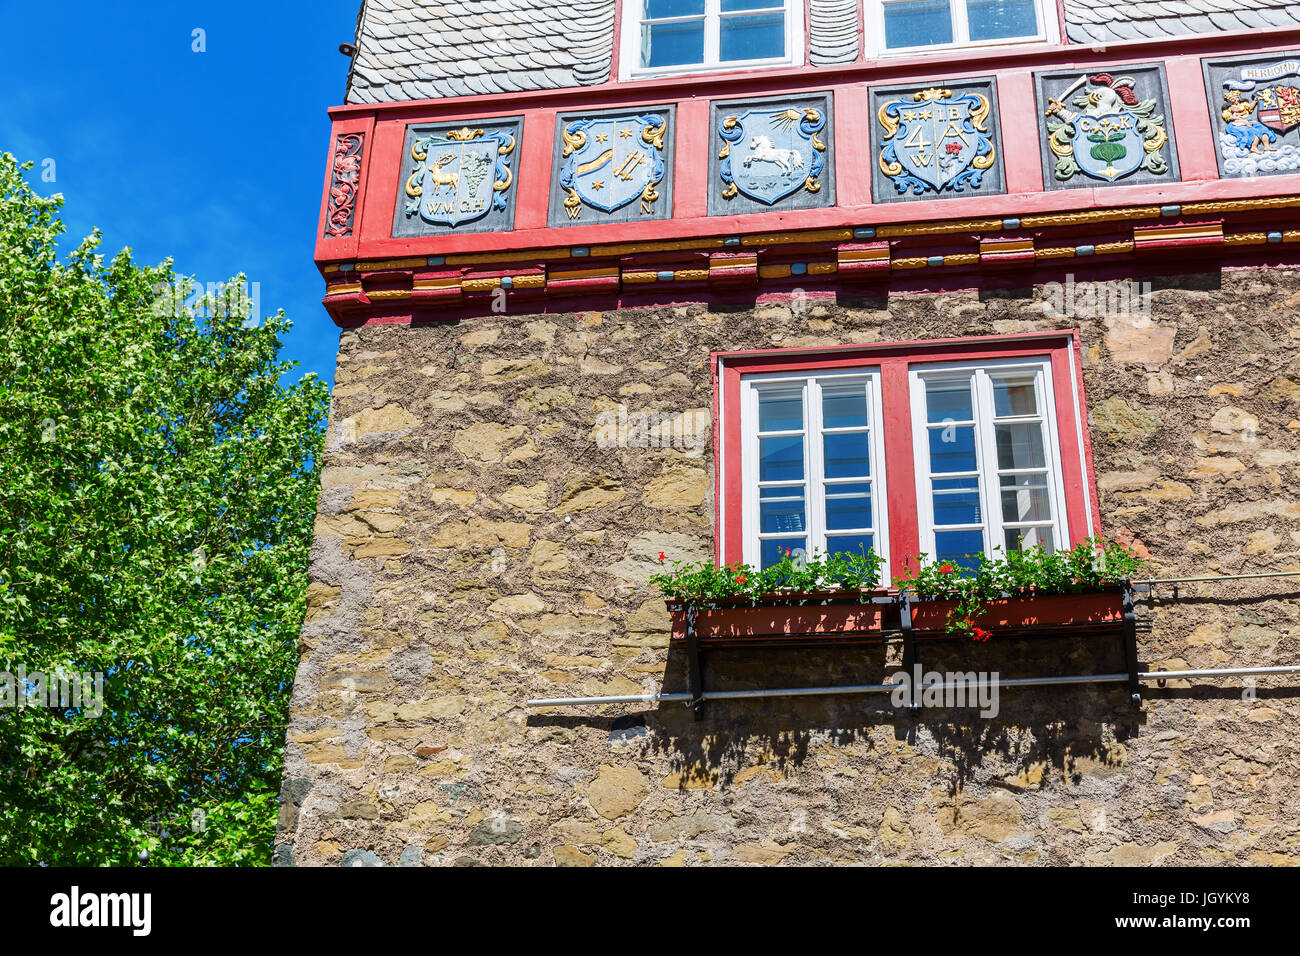 detail of the historical city hall of Herborn, Germany Stock Photo